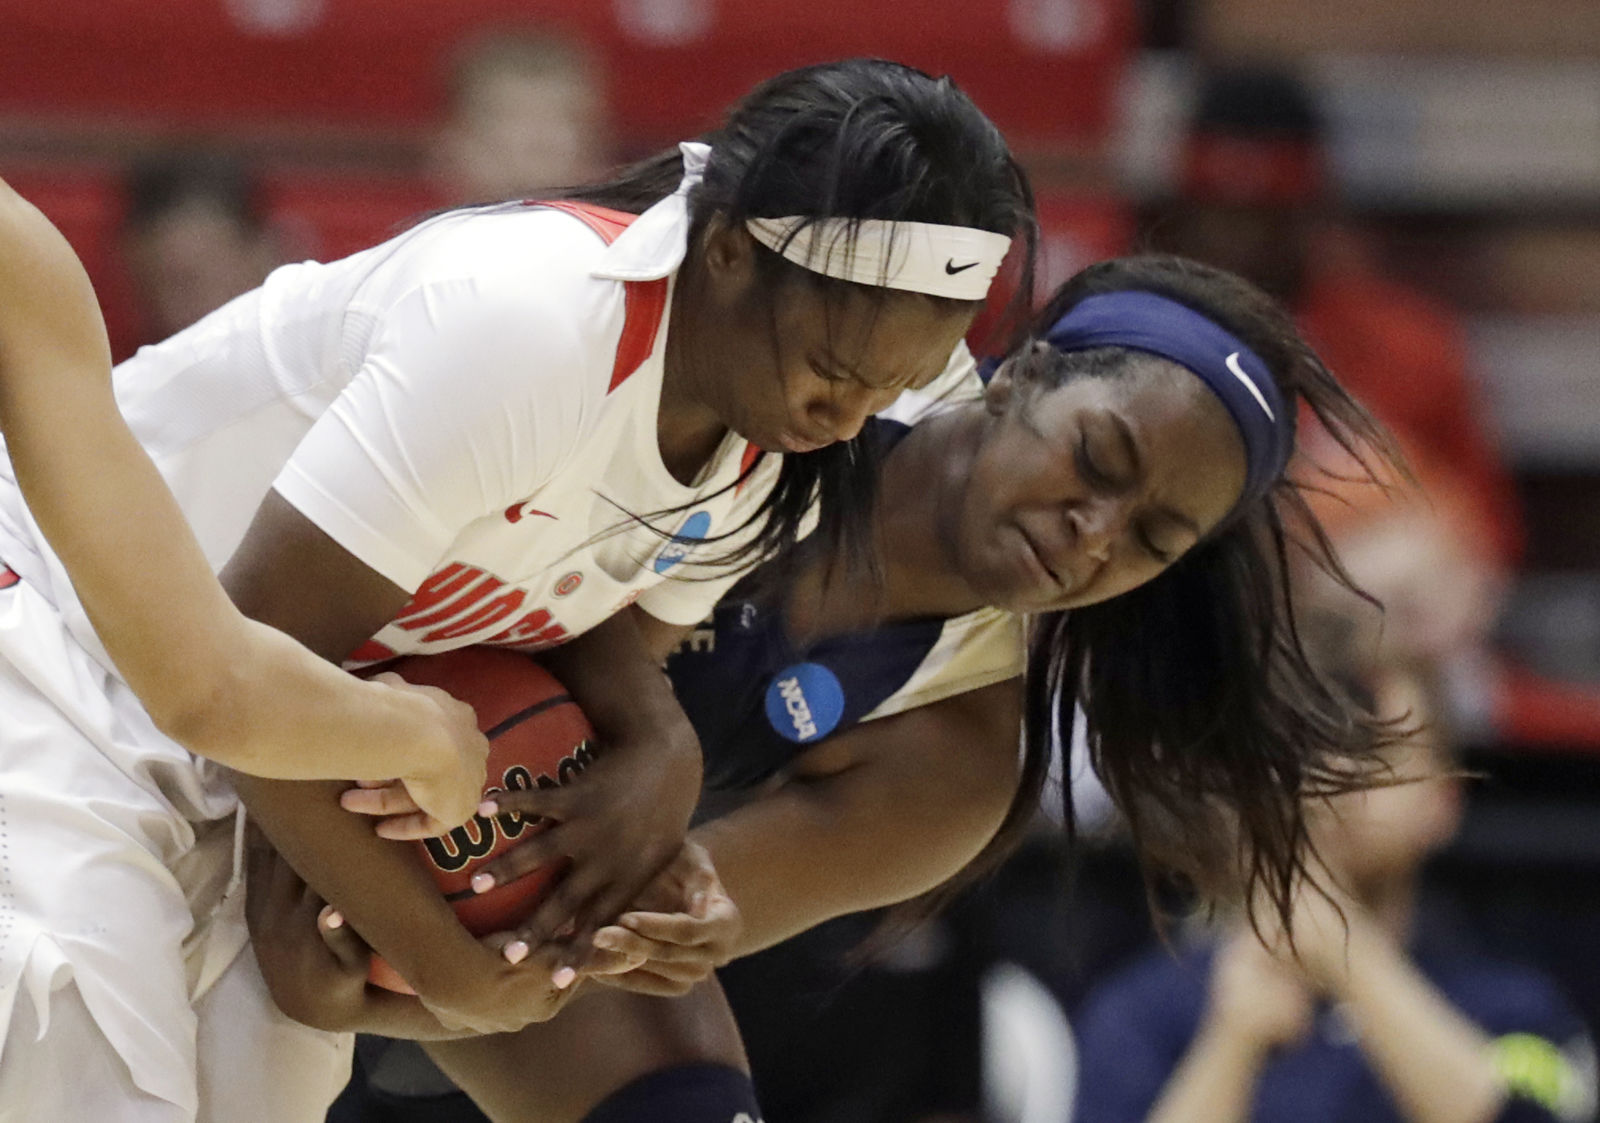 Ohio State's Linnae Harper, left, and George Washington's Neila Luma battle for the ball in the first half during a first-round game in the NCAA women's college basketball tournament Saturday, March 17, 2018, in Columbus, Ohio. (AP Photo/Tony Dejak)